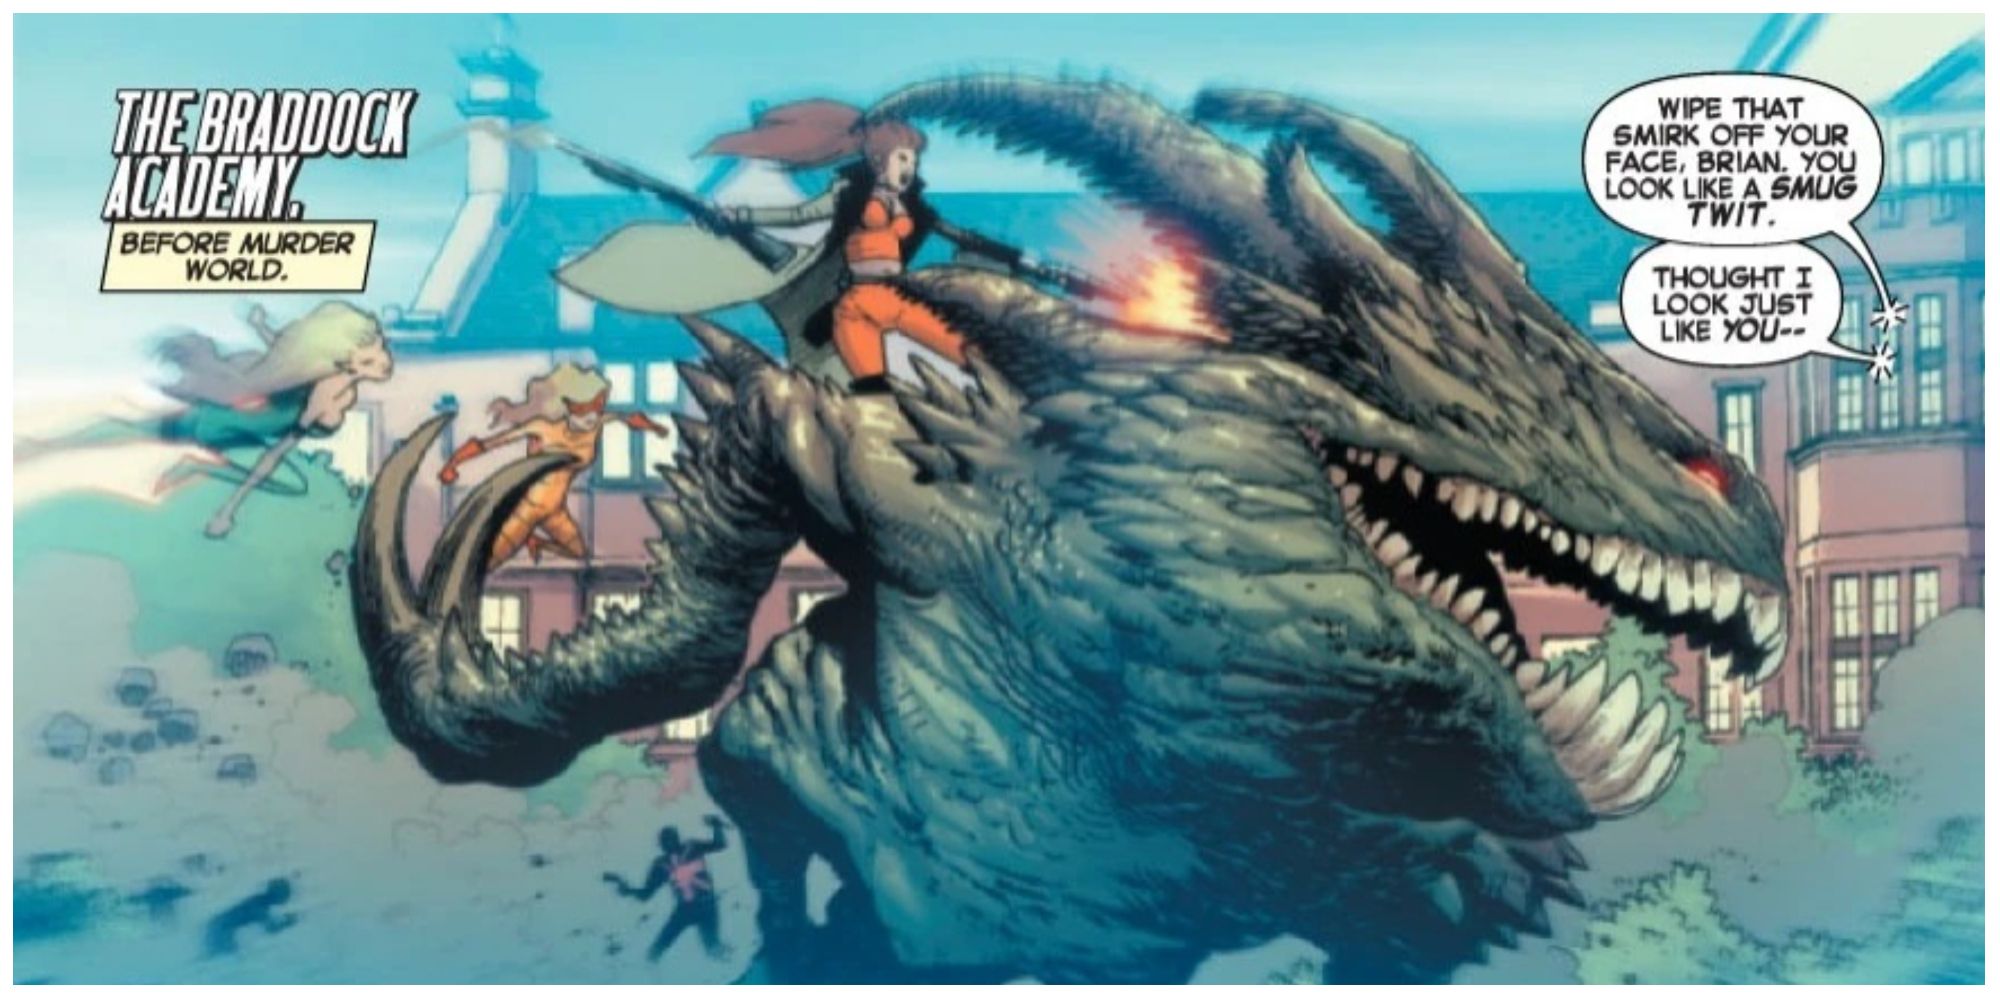 Elsa Bloodstone riding a monster in the Marvel comics